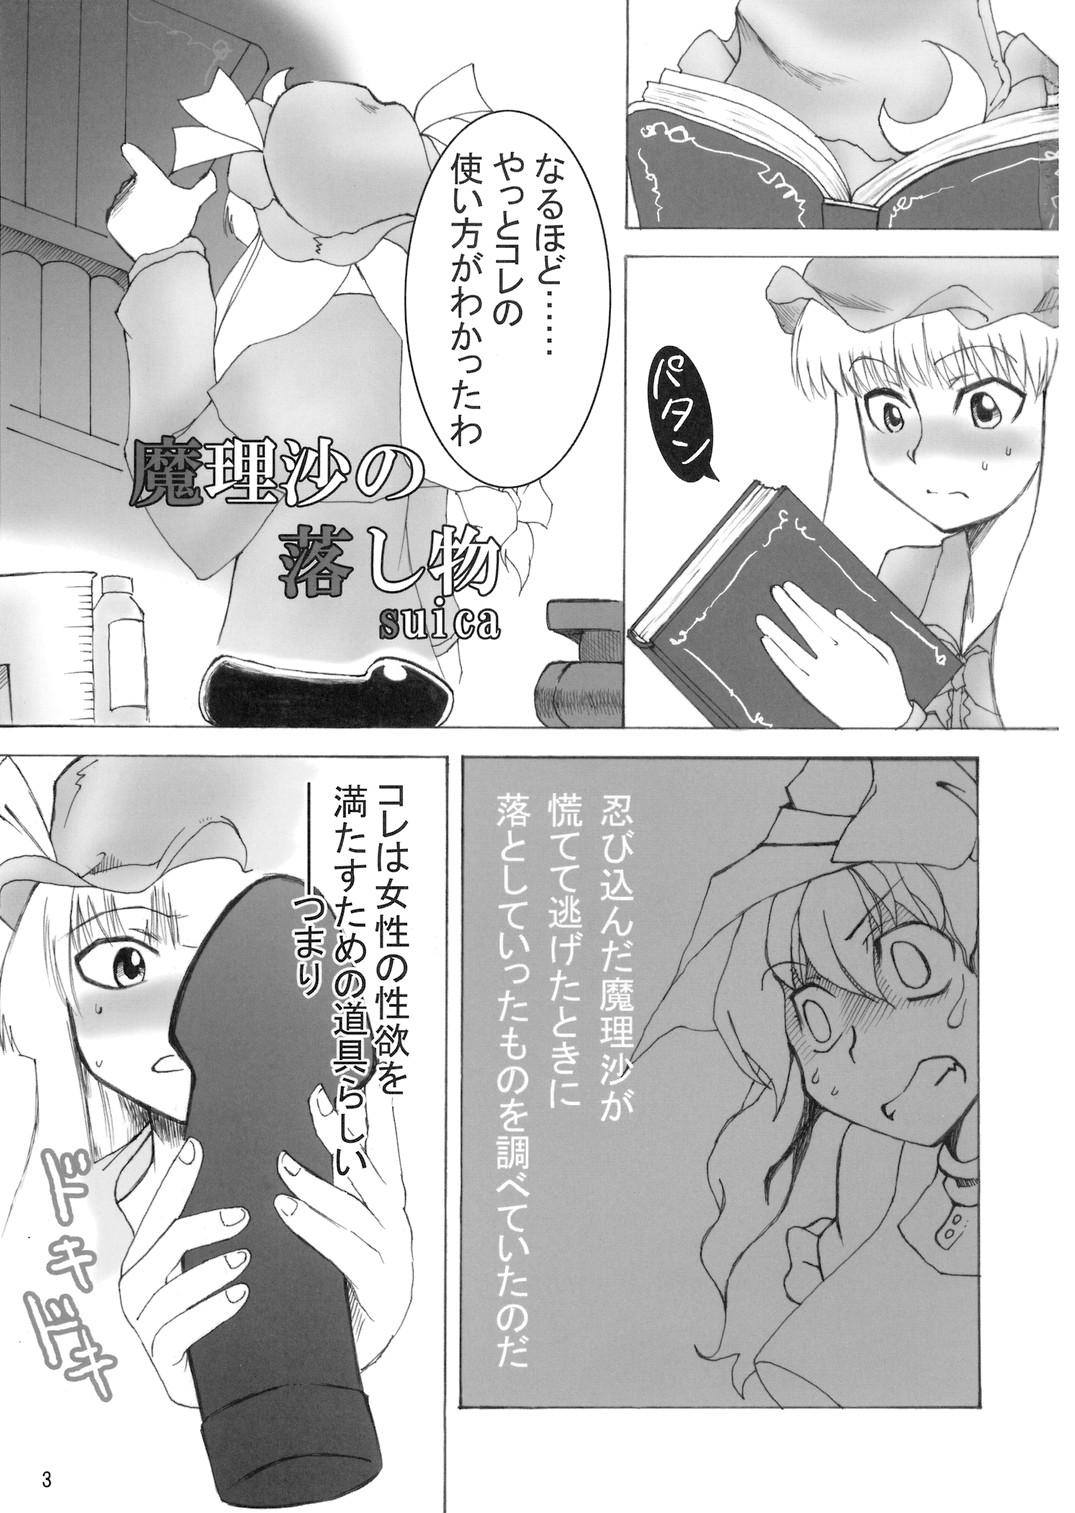 Face Sitting Four of a Kind - Touhou project Wank - Page 3